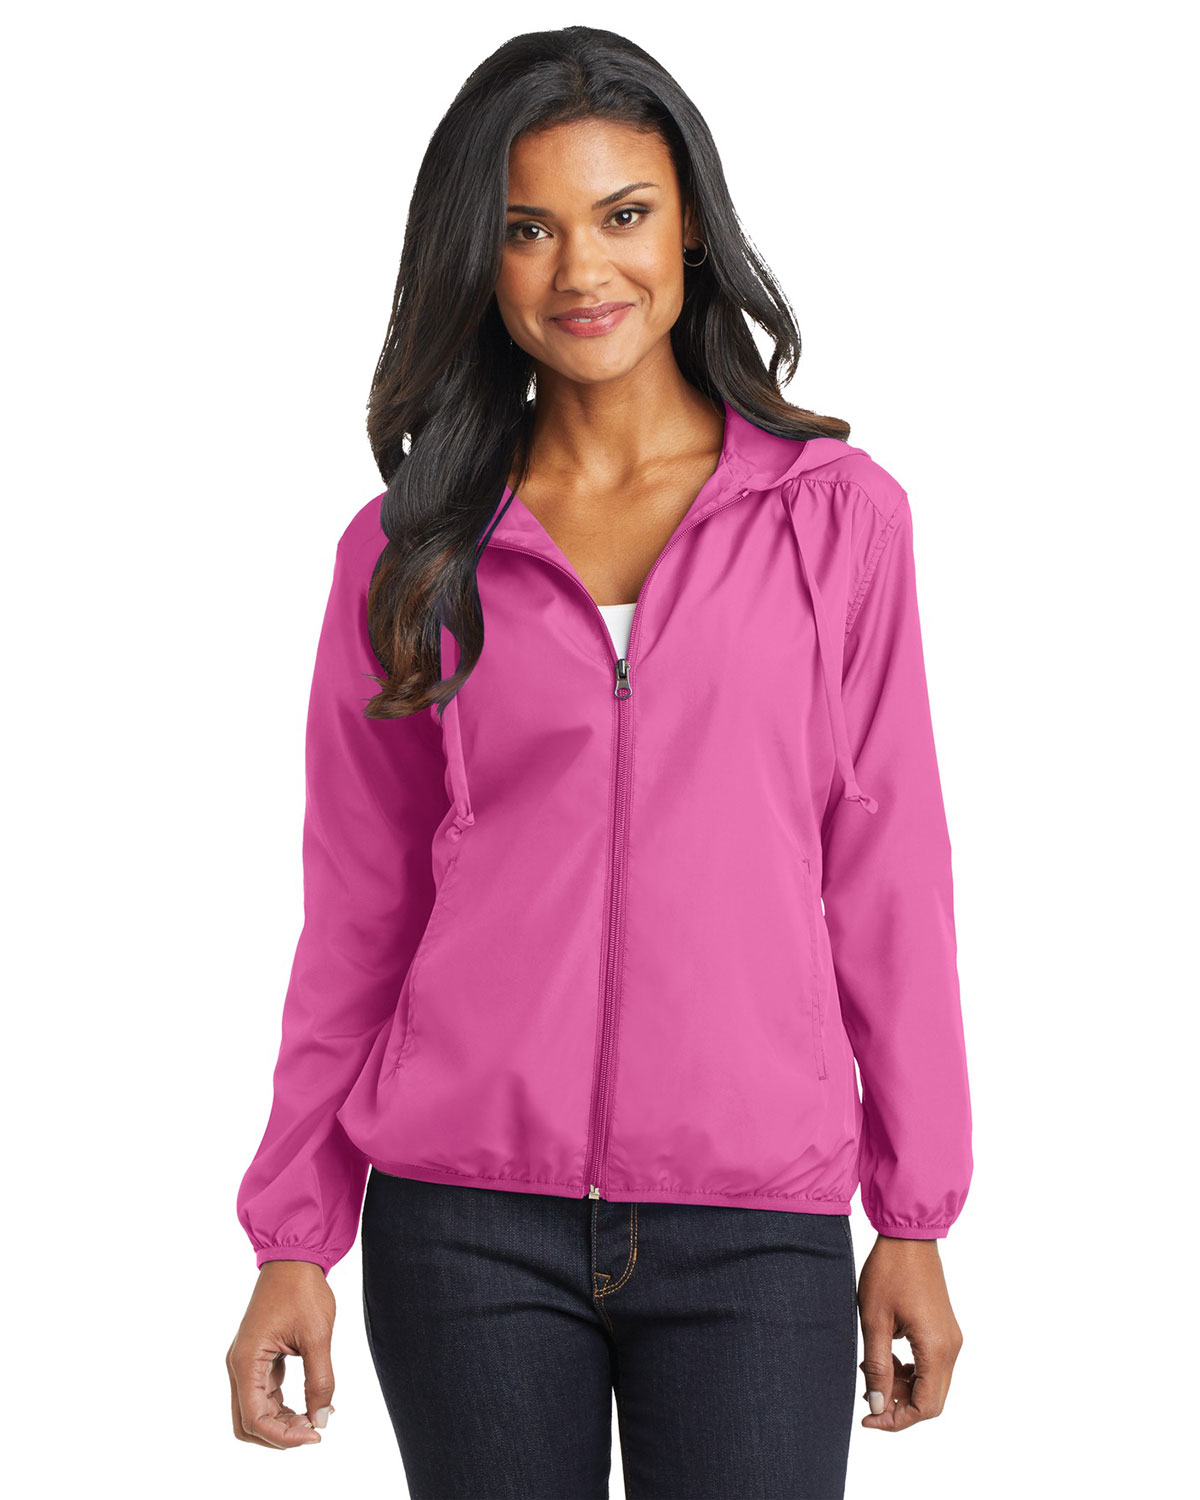 Port Authority L305 Women Hooded Essential Jacket at Apparelstation